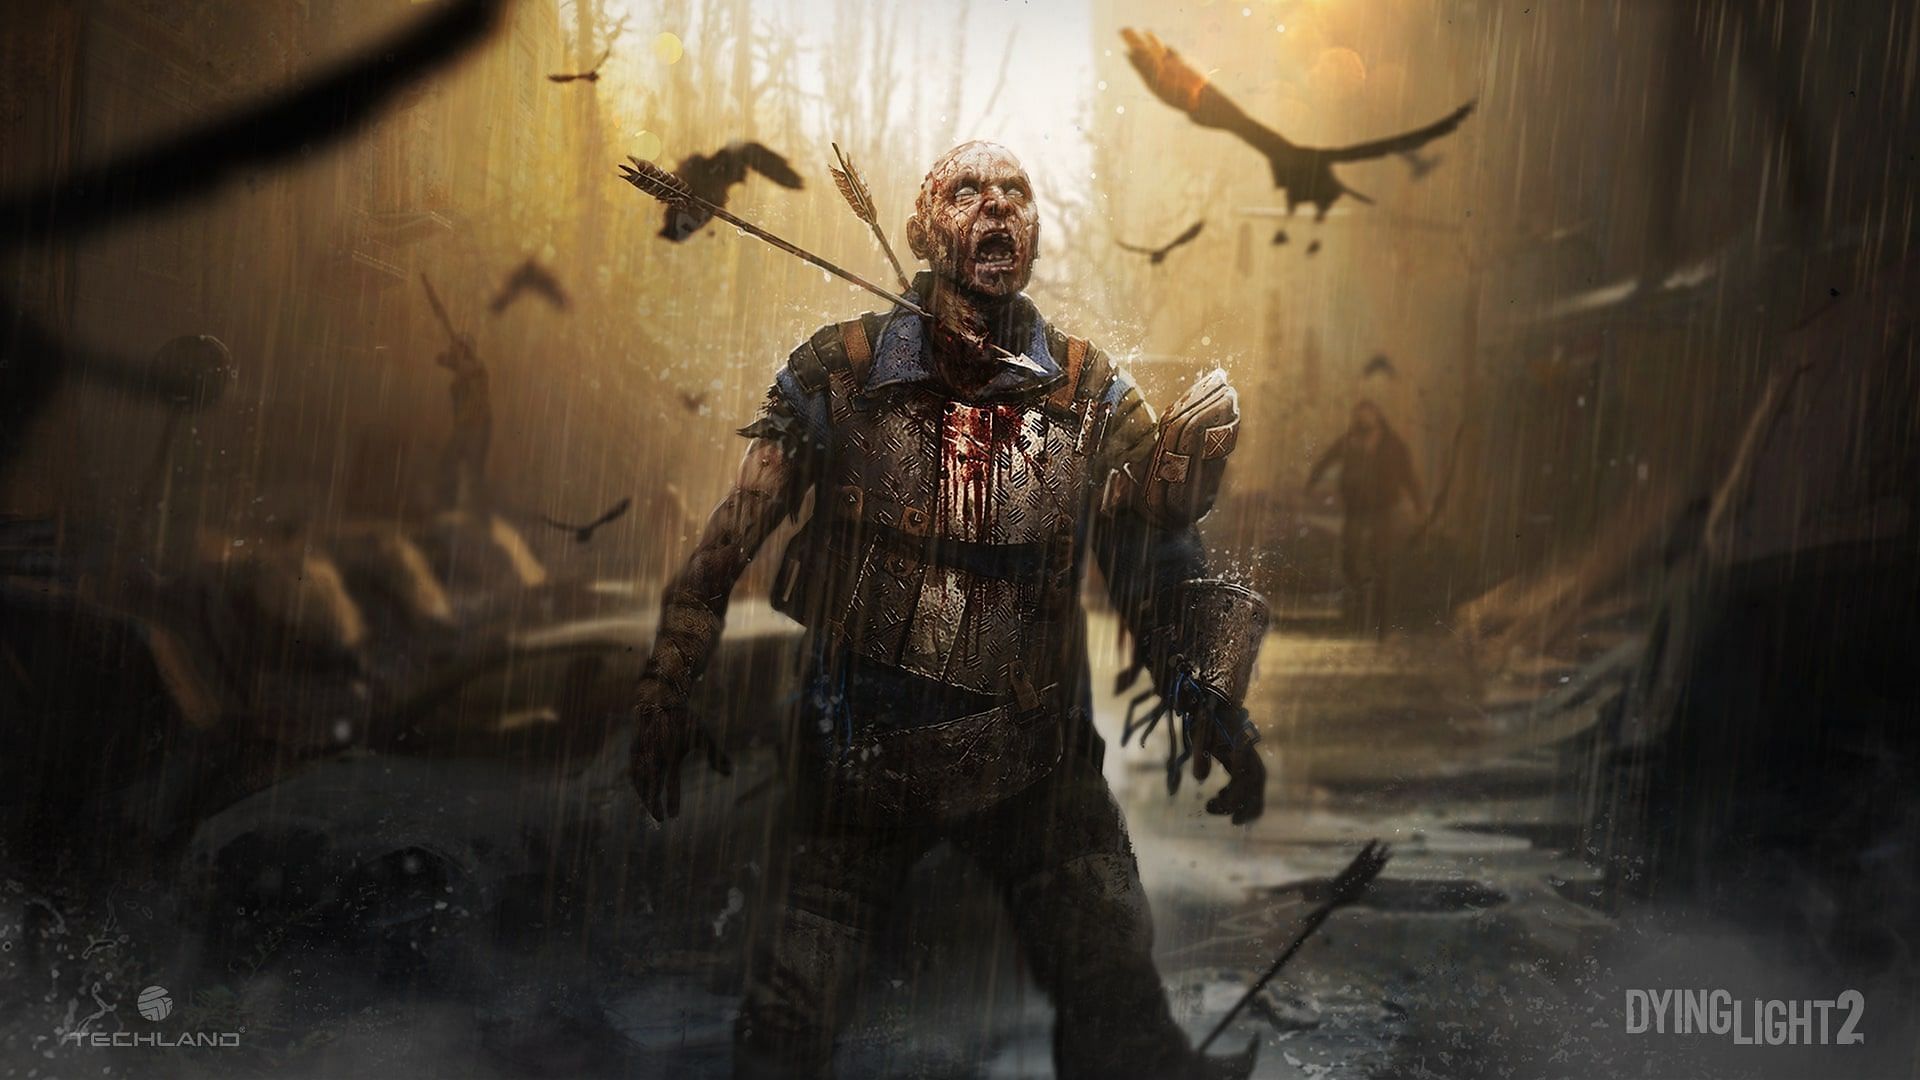 Zombies of Dying Light 2 (Image via Dying Light Wiki)